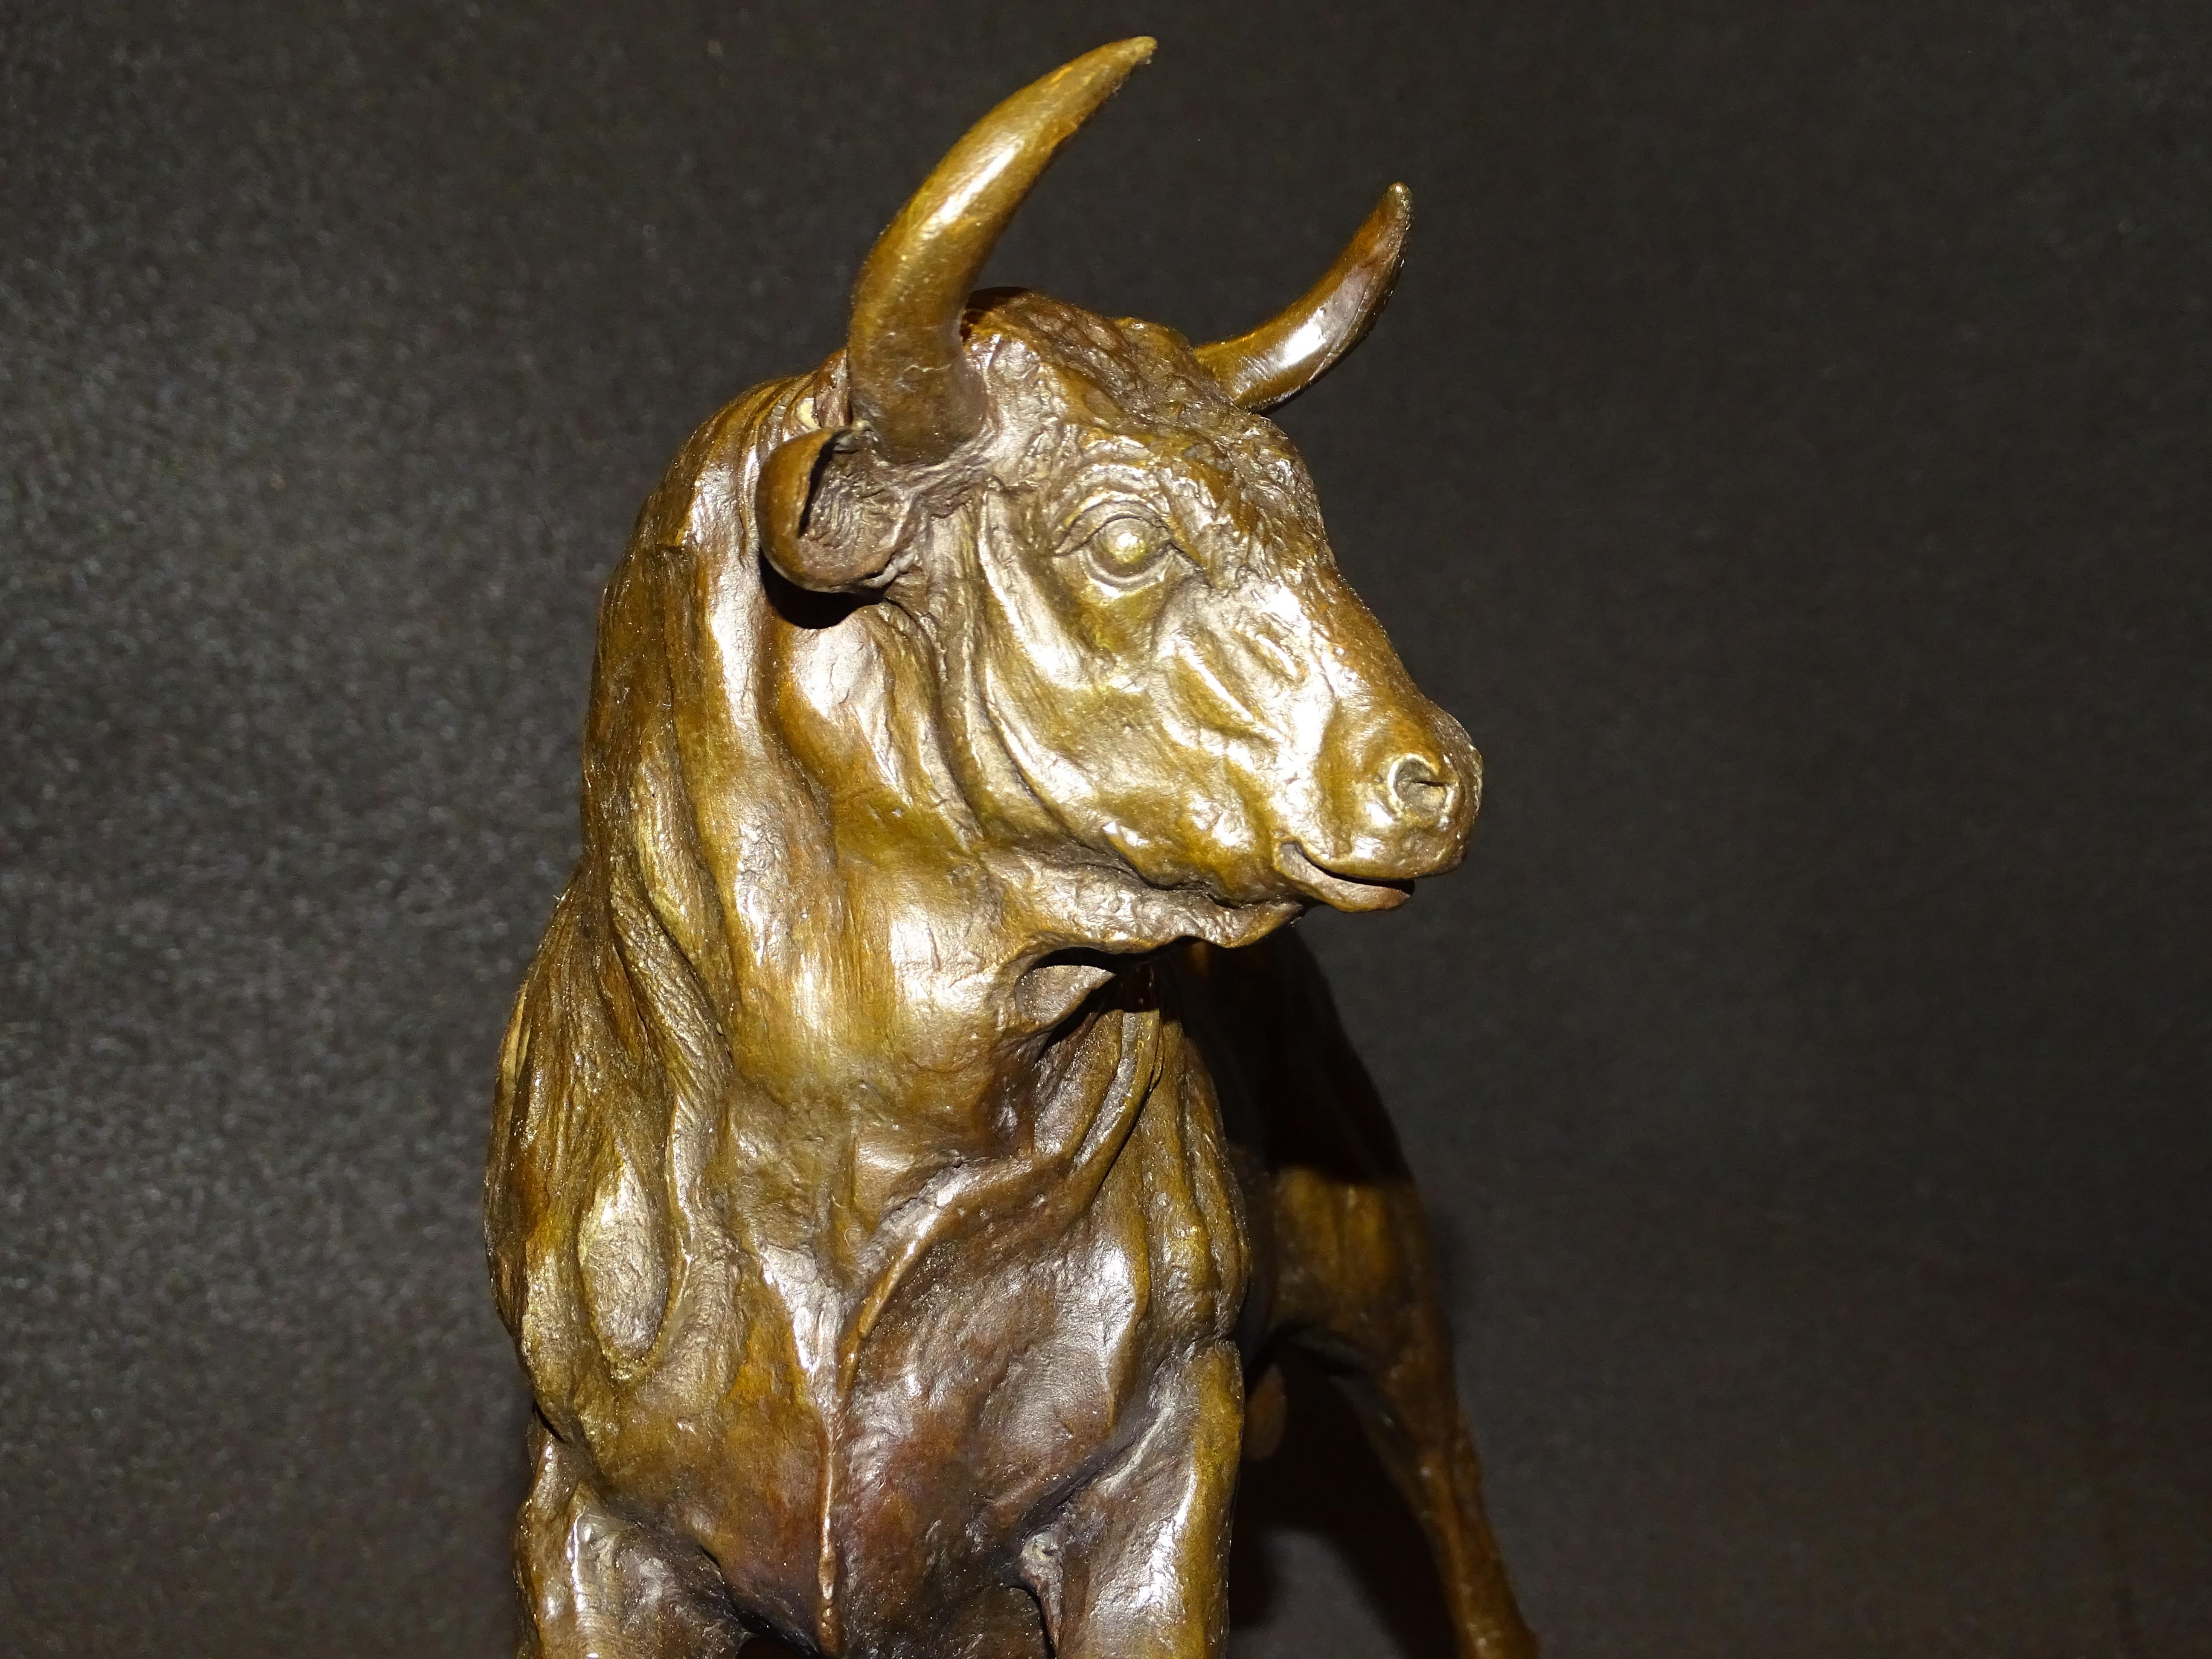 Late 19th Century 19th Century Bronze Bull, Animal Sculpture by Barye, Signed